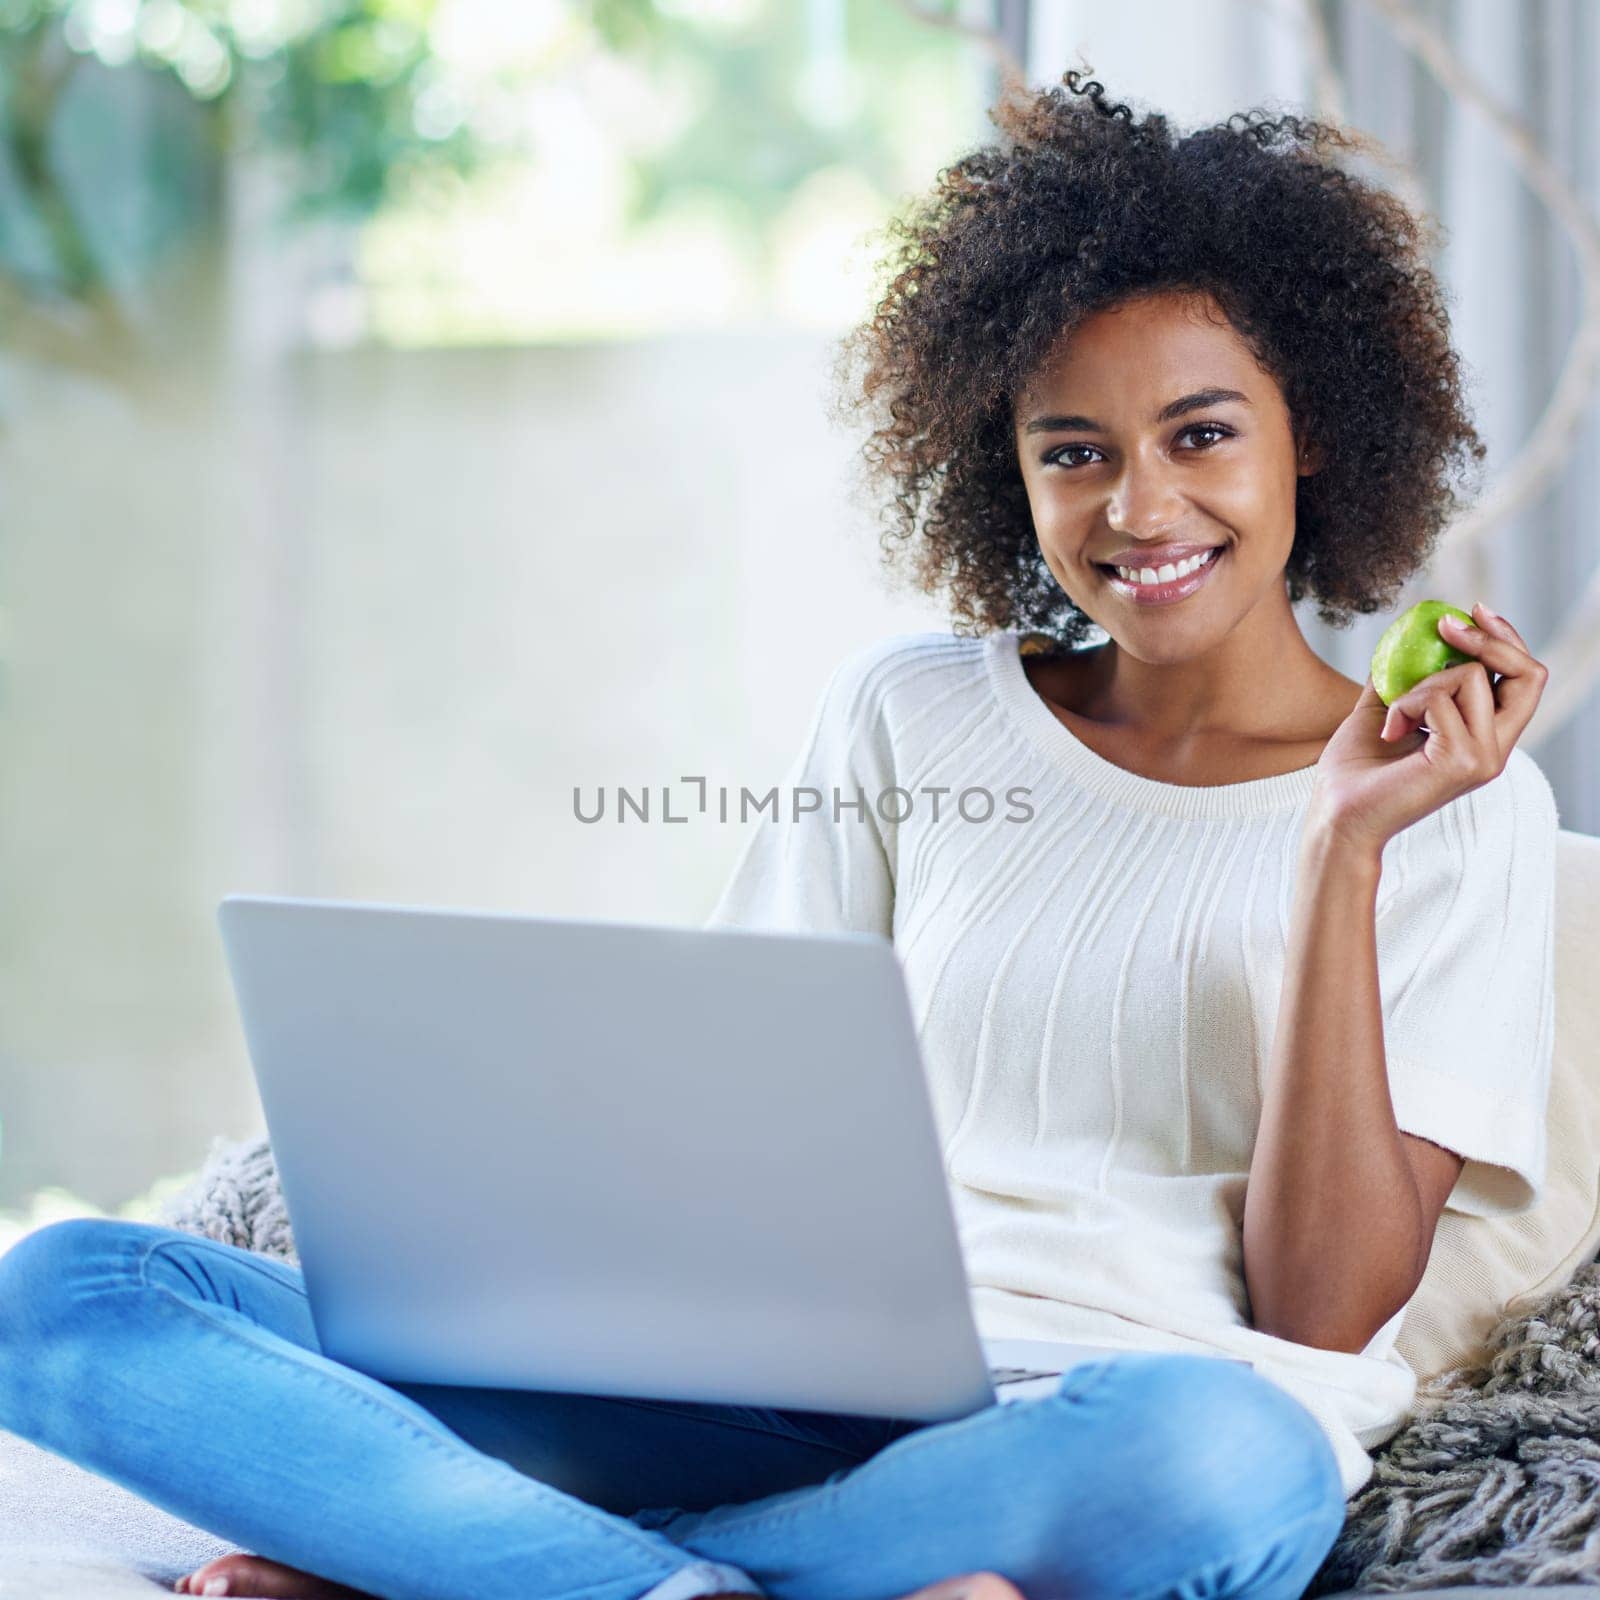 Apple, typing and portrait of woman on sofa with laptop for social media, lifestyle blog and food website at home. Happy female person, technology or fruit for nutrition, healthy diet or clean eating.